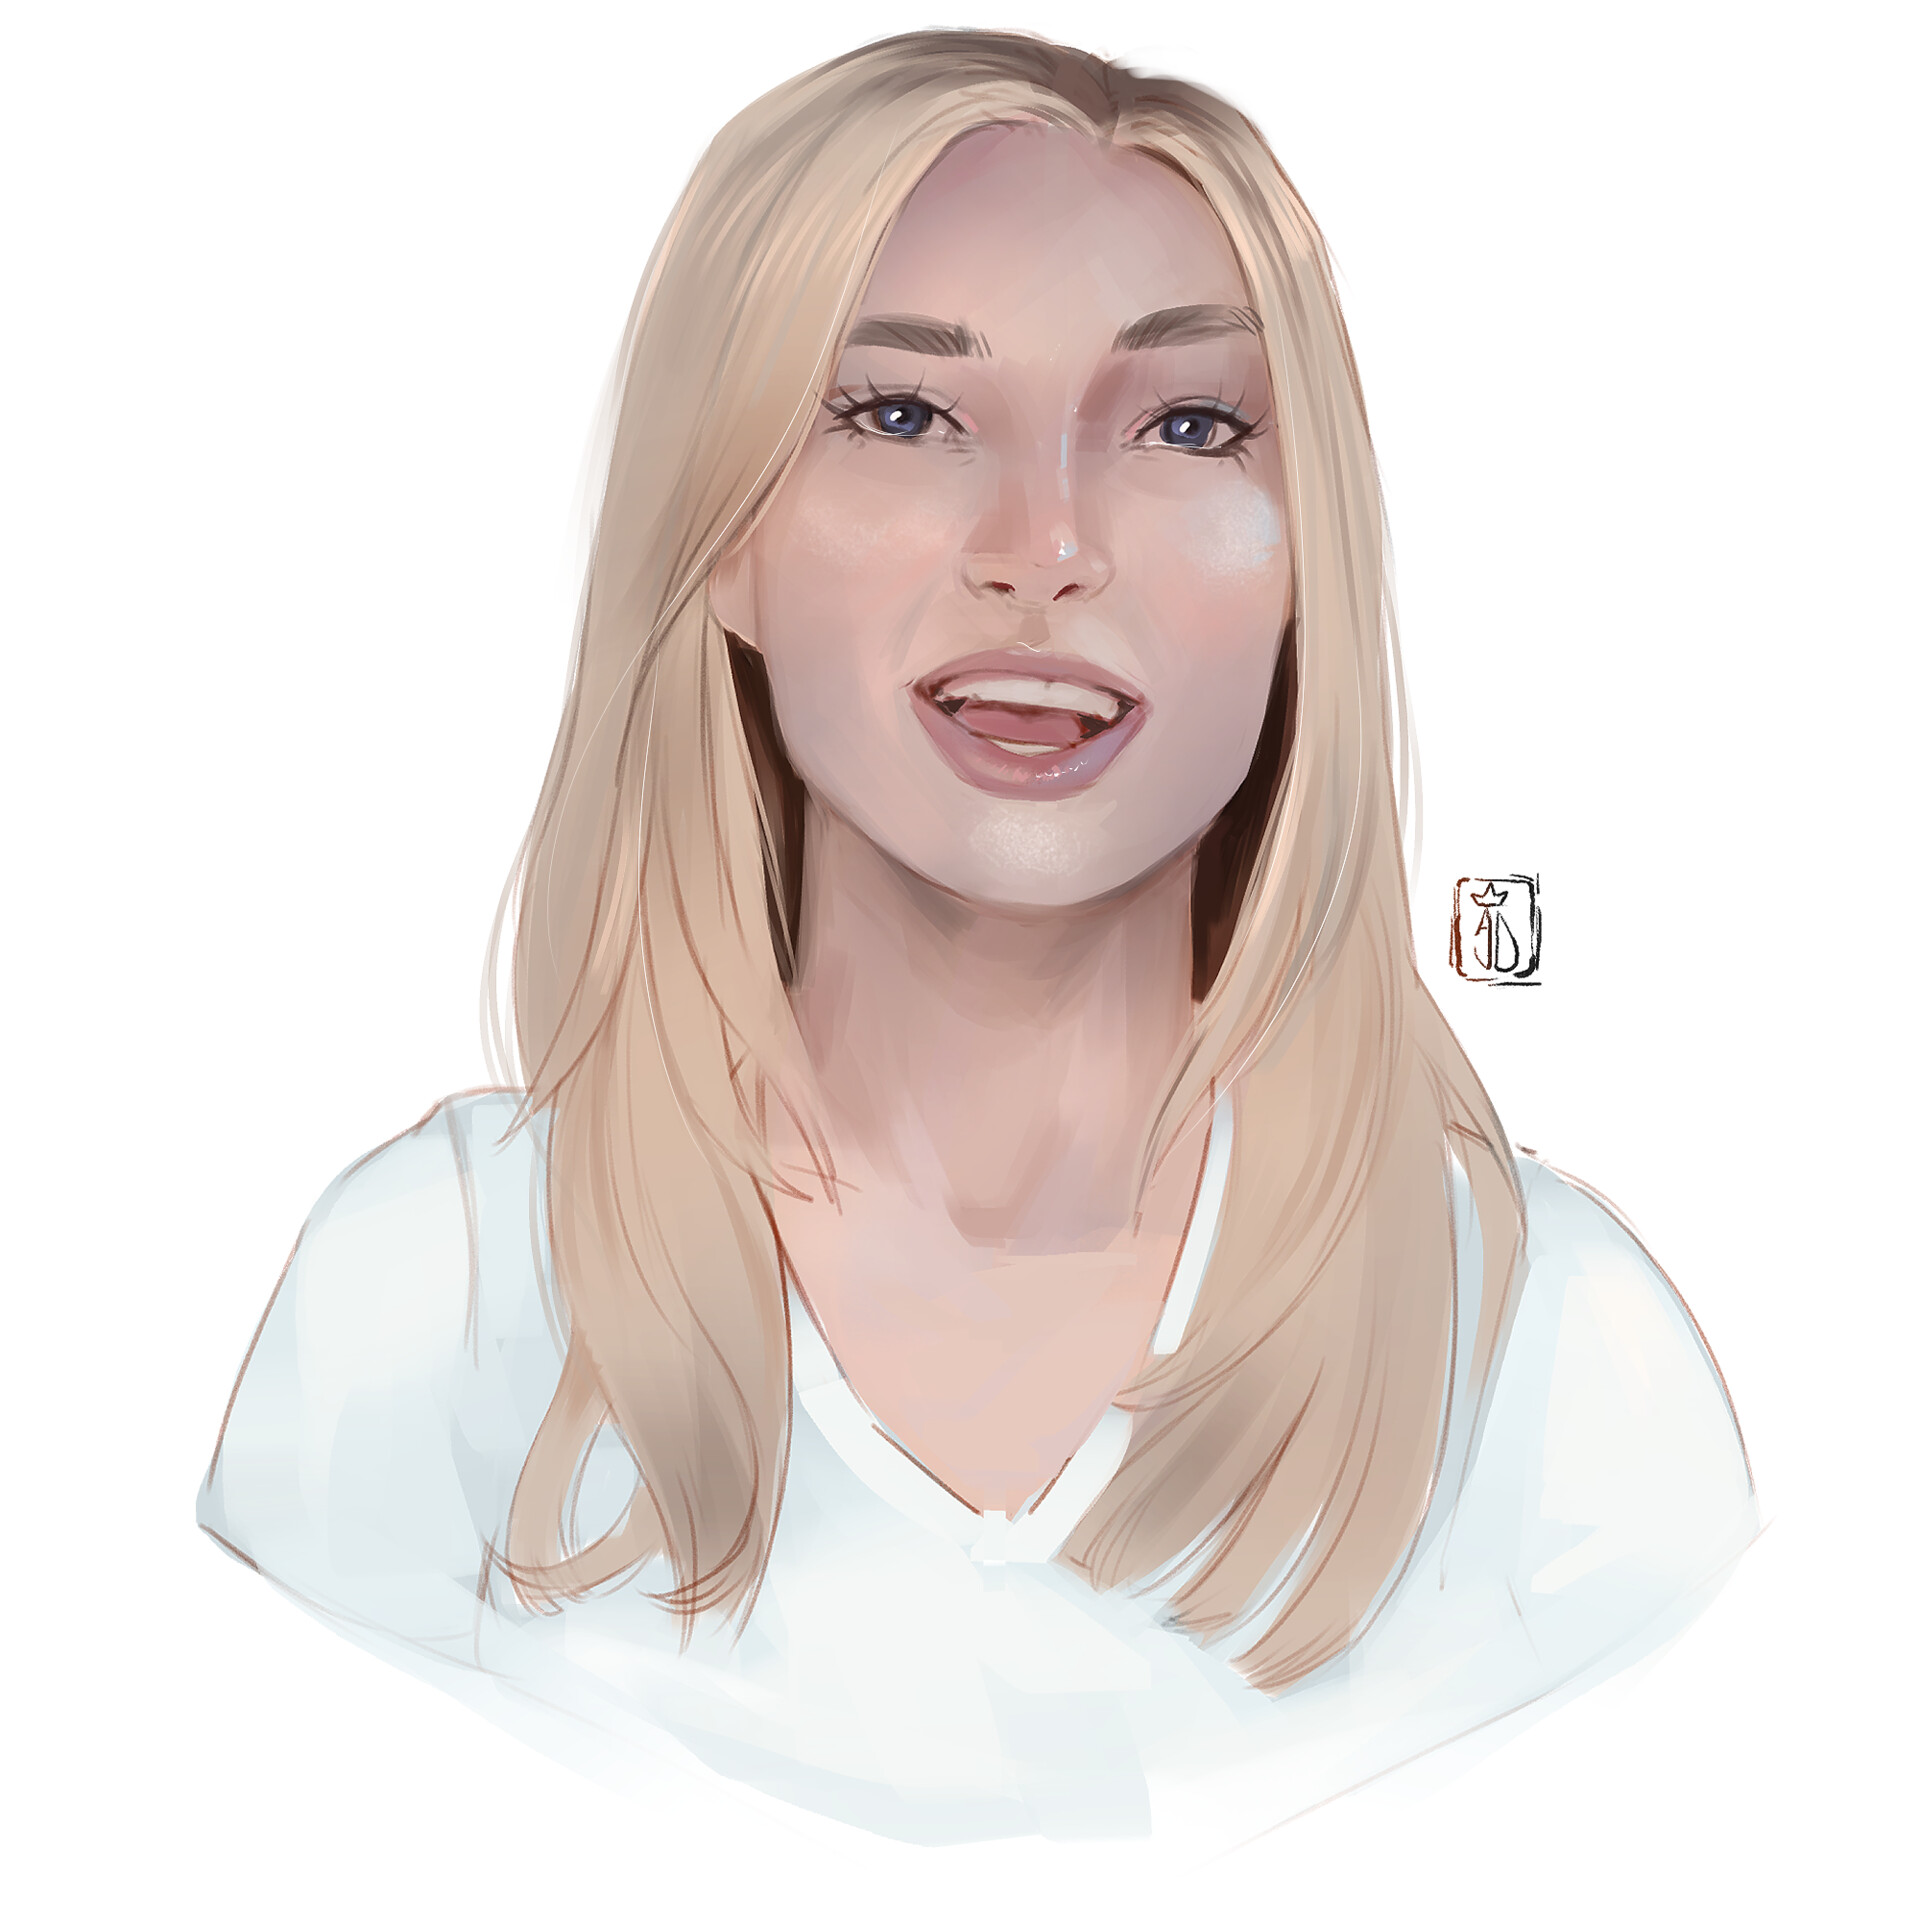 portrait of Elyse Willems from Roosterteeth.